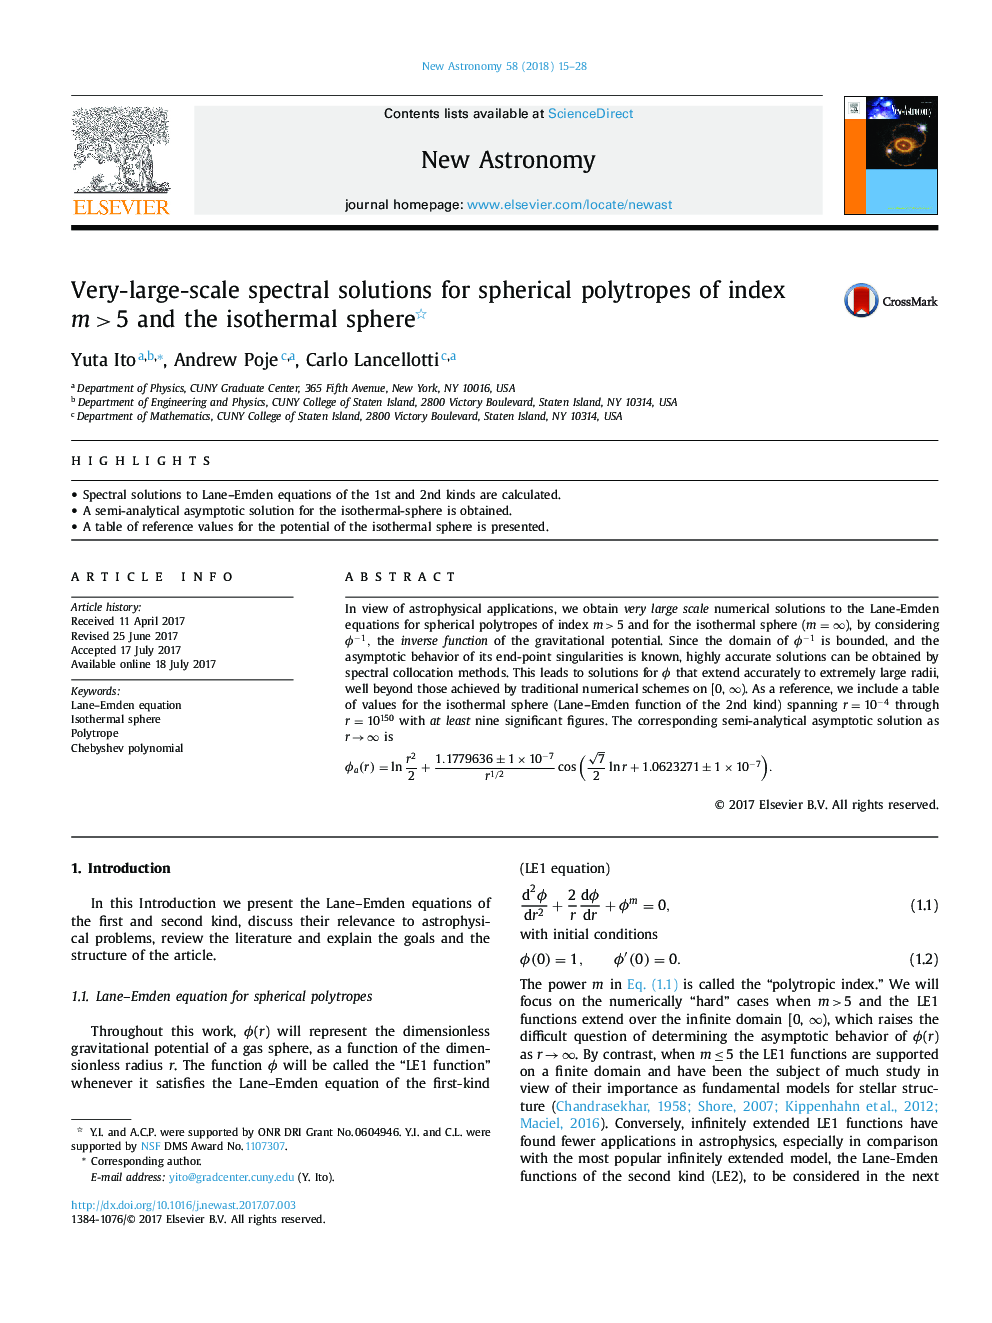 Very-large-scale spectral solutions for spherical polytropes of index mâ¯>â¯5 and the isothermal sphere